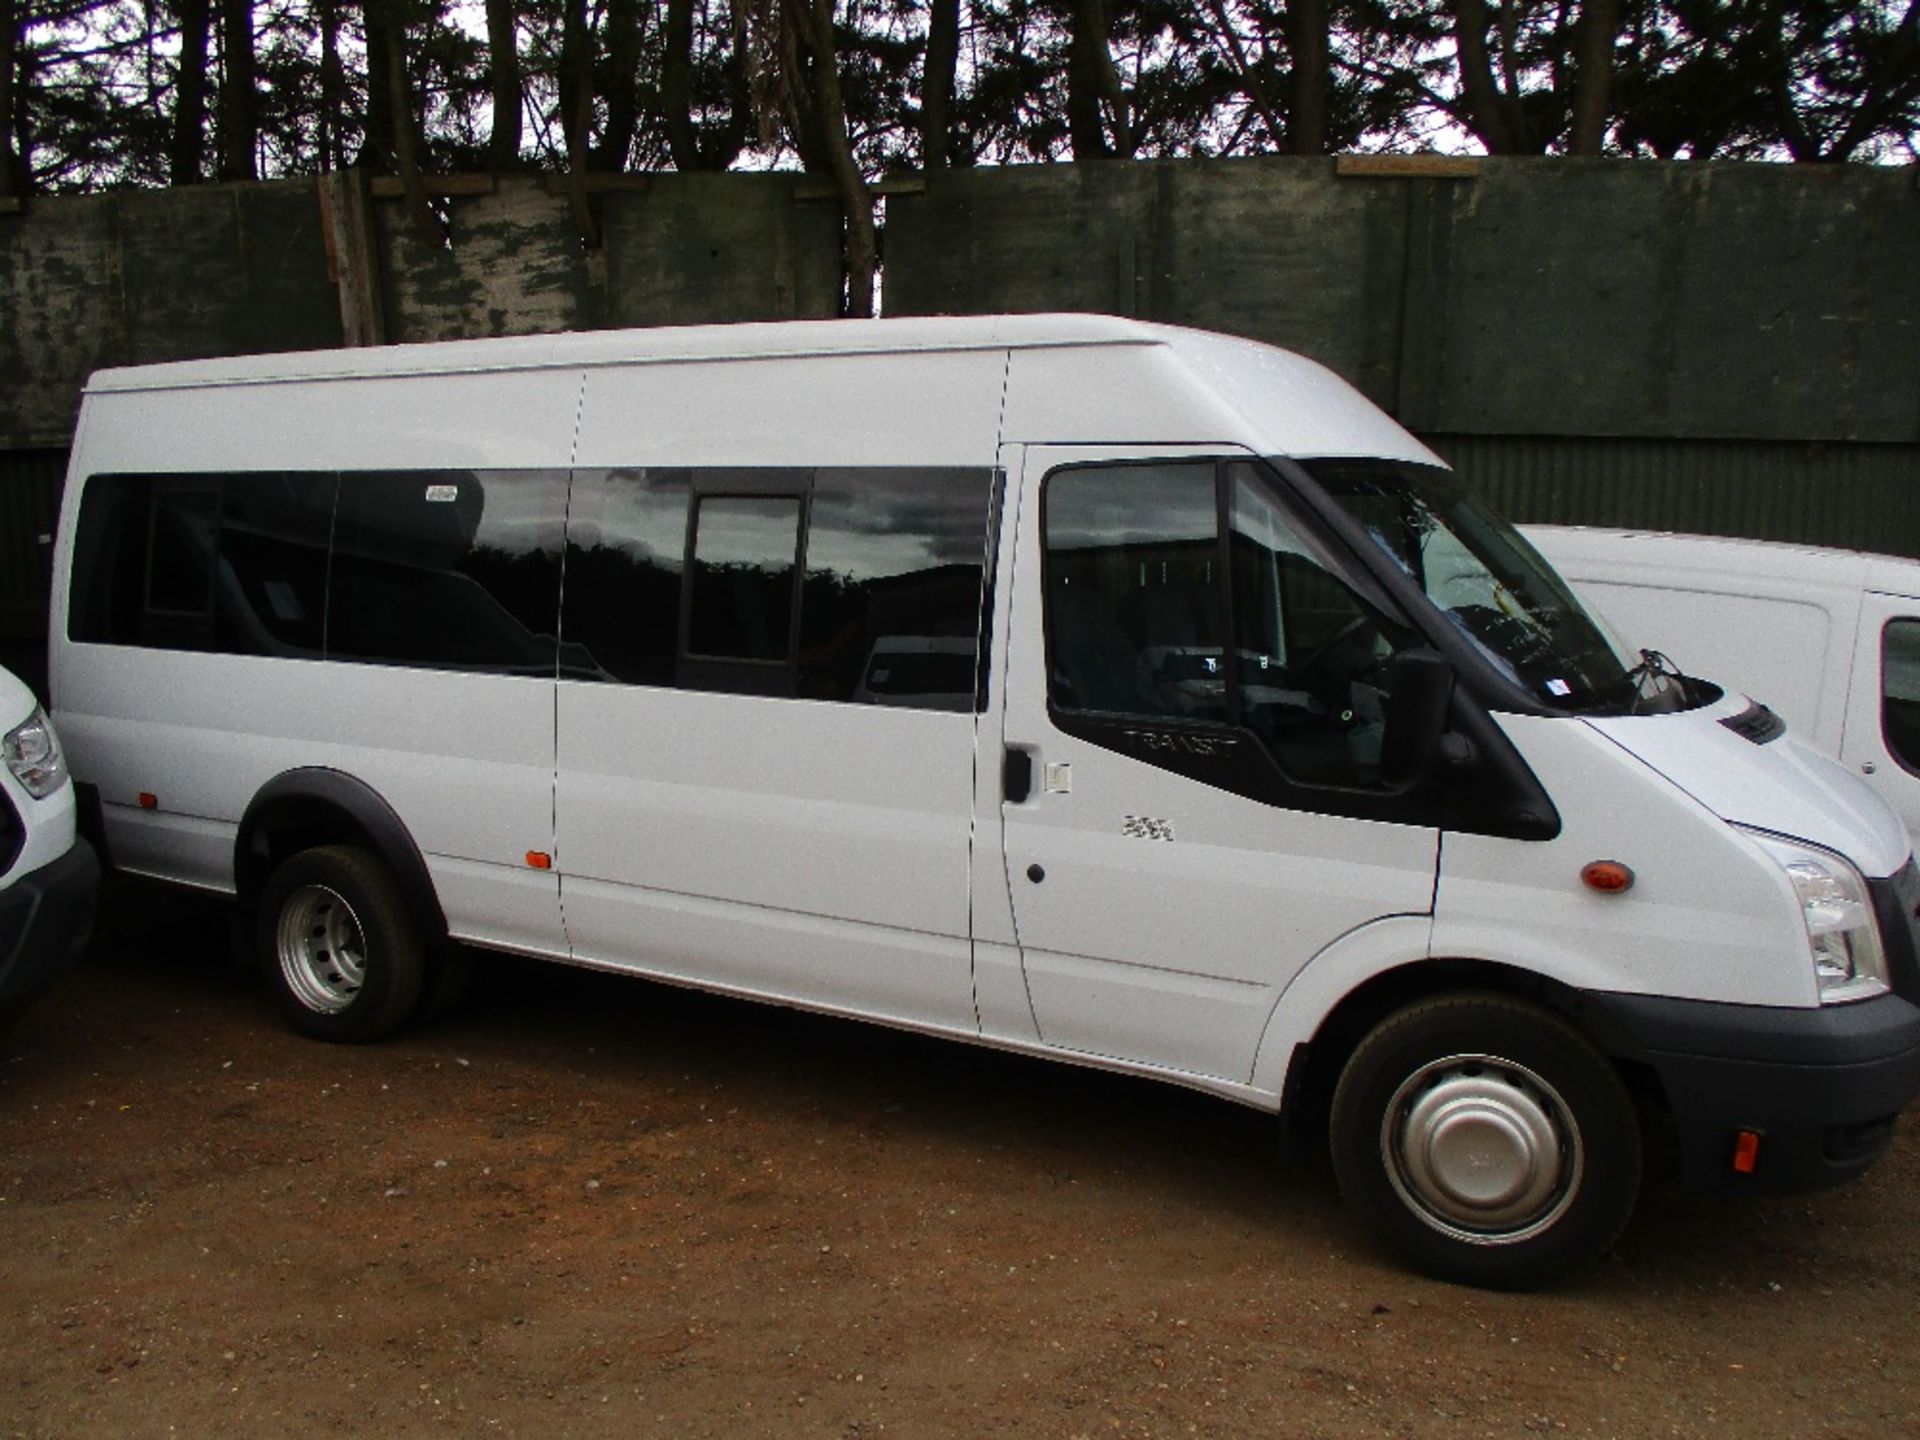 Ford Transit mini bus, 17 seats in total, REG:BD63 OEF previously damaged and repaired, 34,680rec.